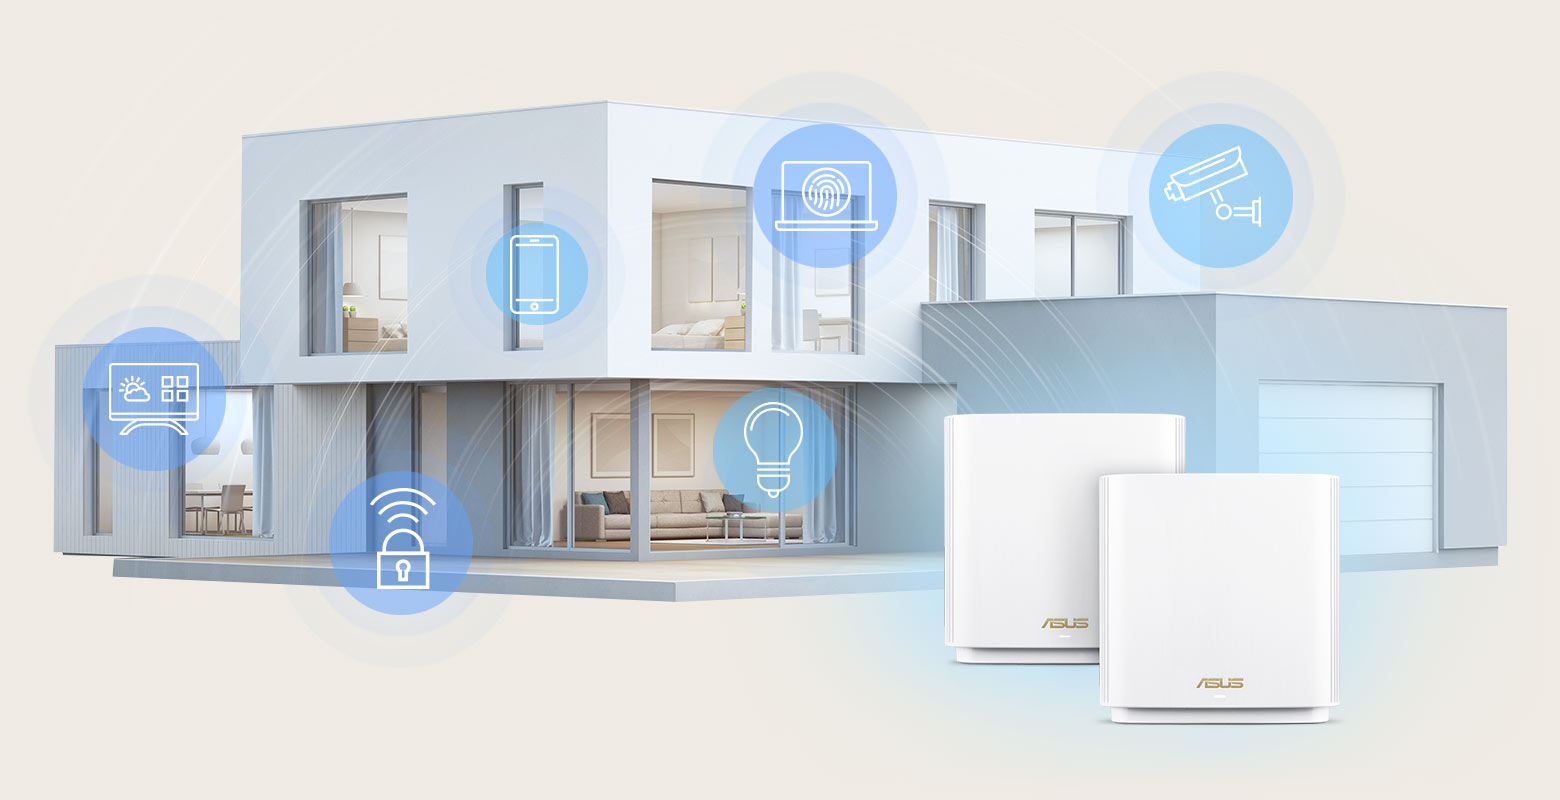 ASUS ZenWiFi AXE7800 mesh routers offer house-wide WiFi coverage of up to 5700 square feet for you to connect all your IoT home gadgets.